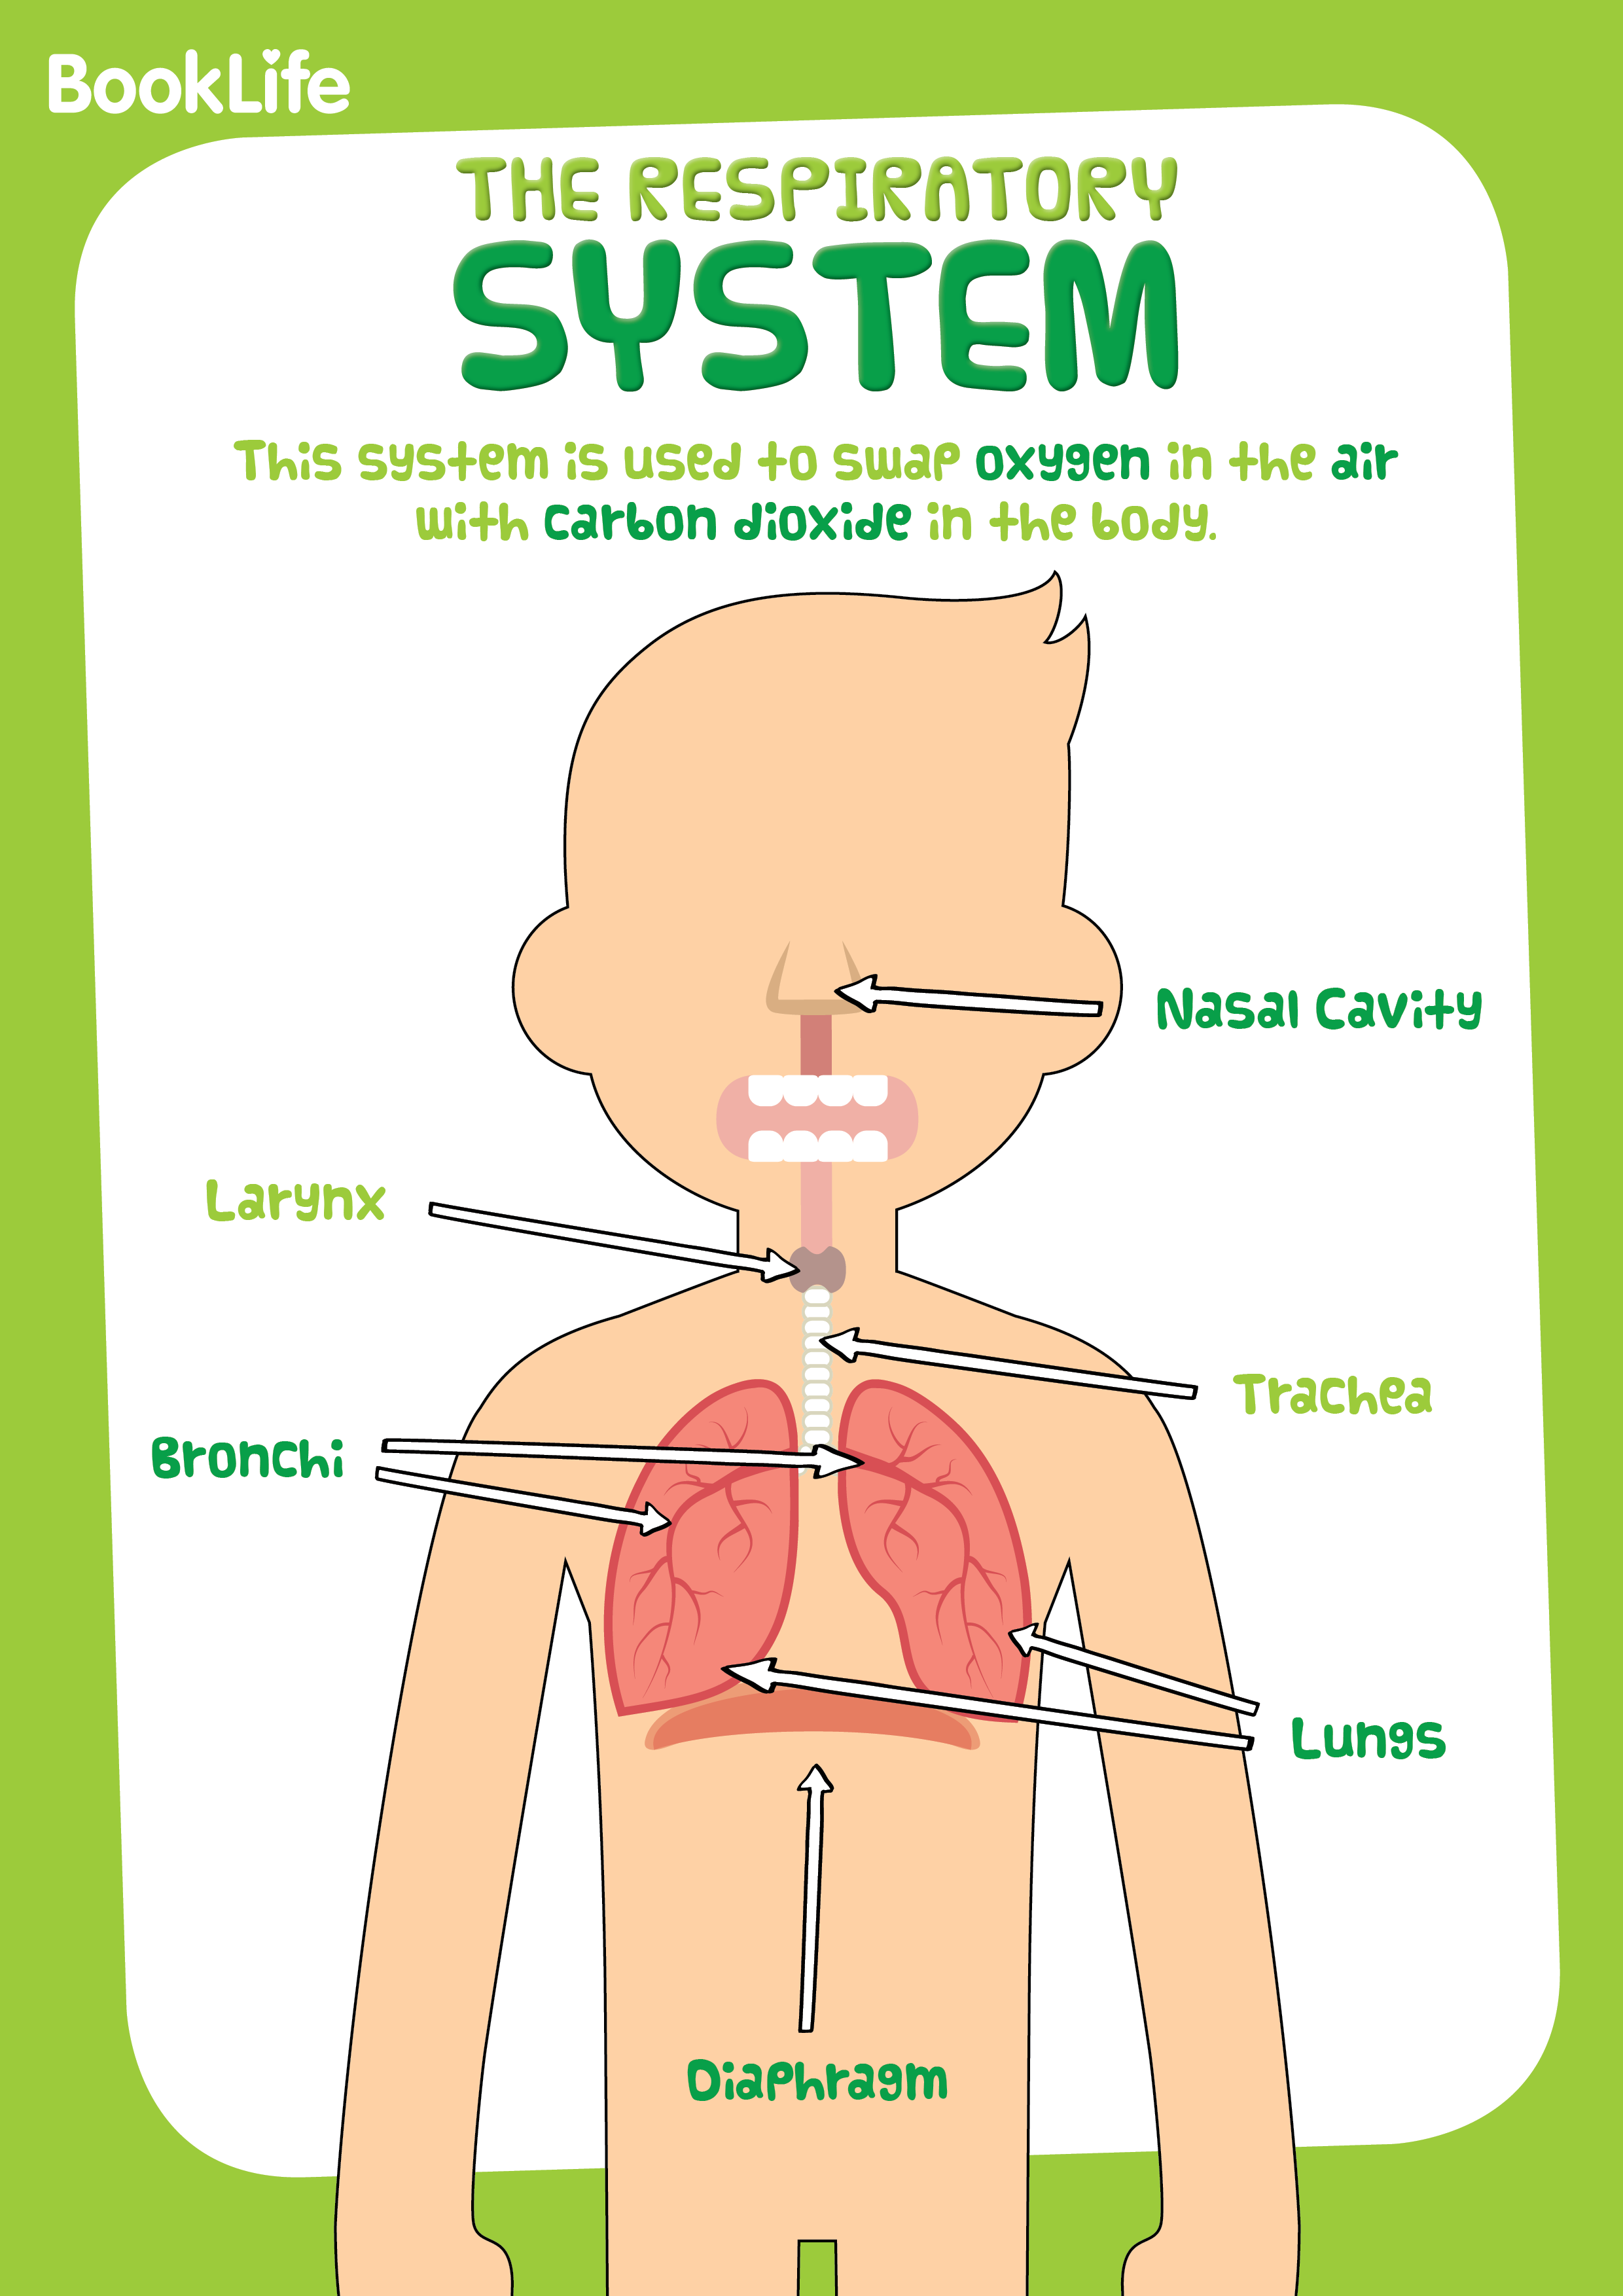 Free Human Body System Poster - Respiratory by BookLife